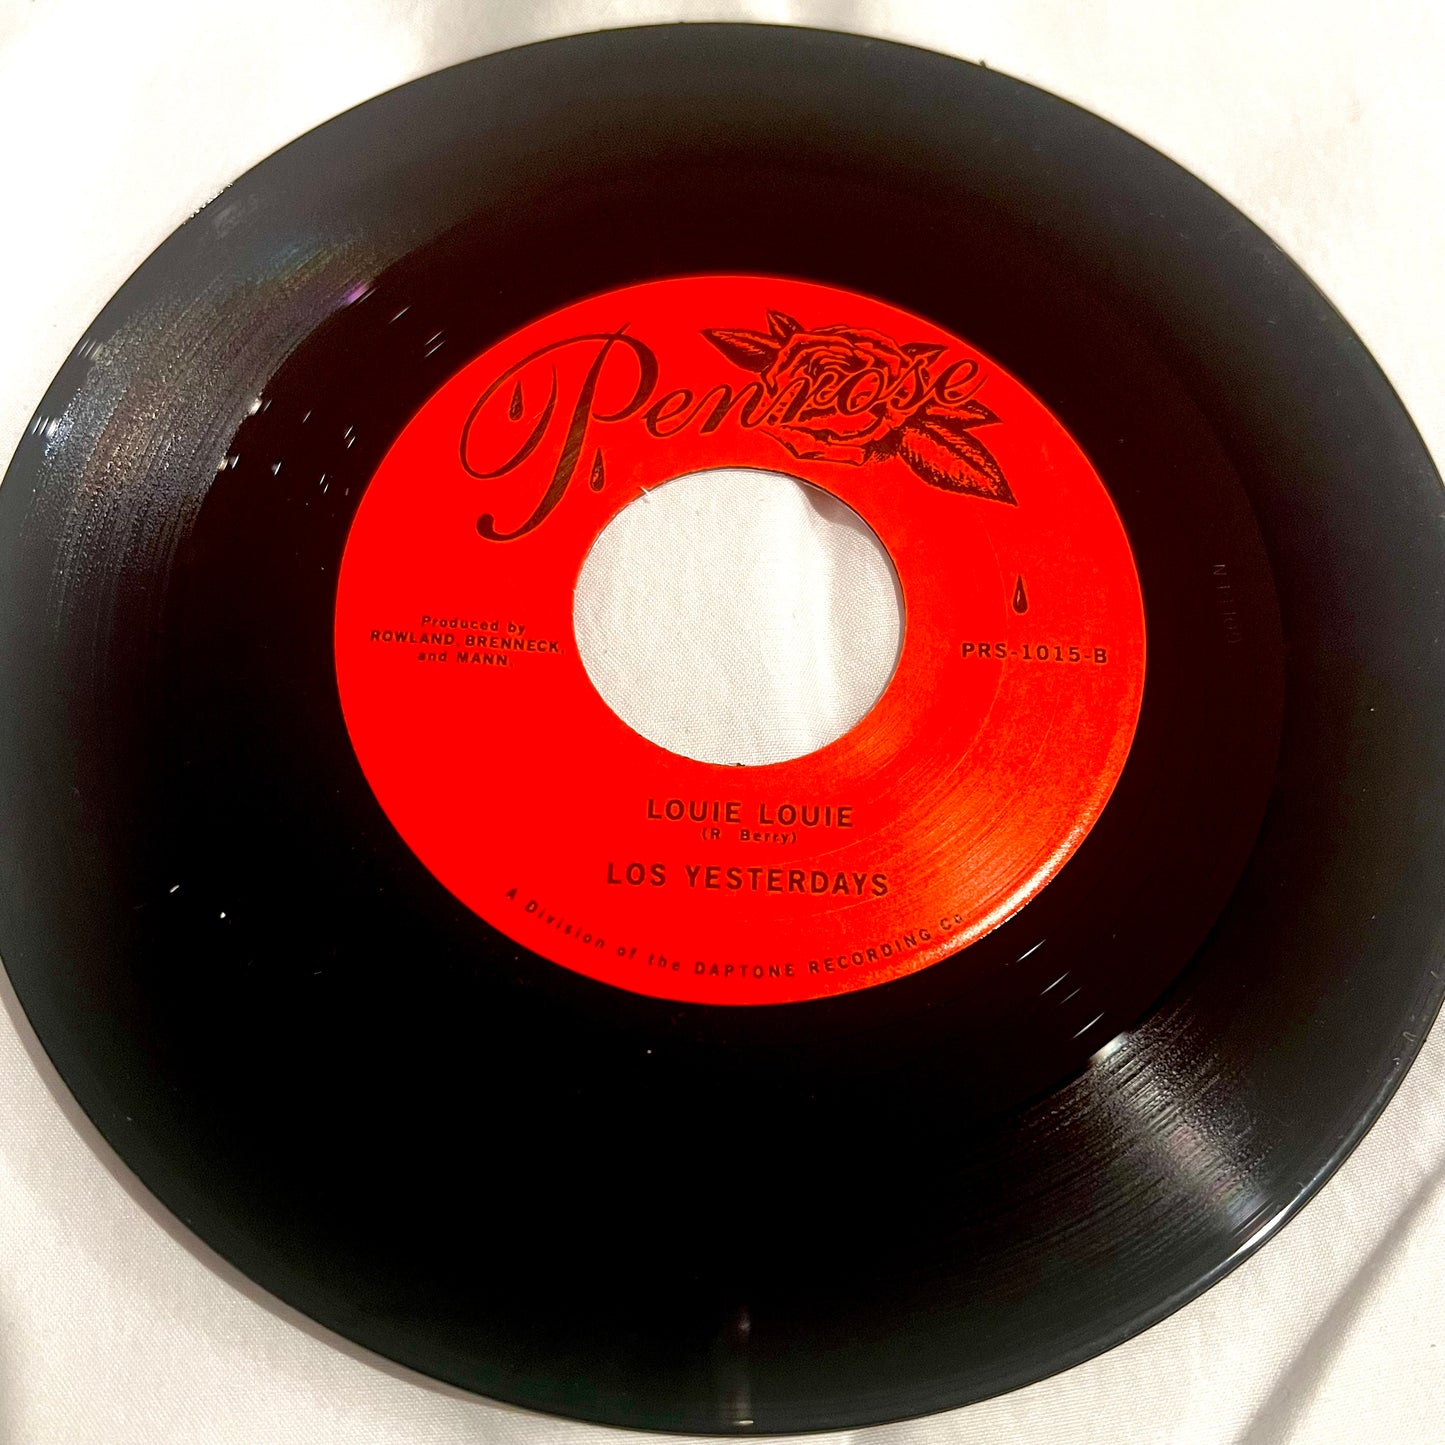 45 Record - Who Made You You / Louis Louis 7”